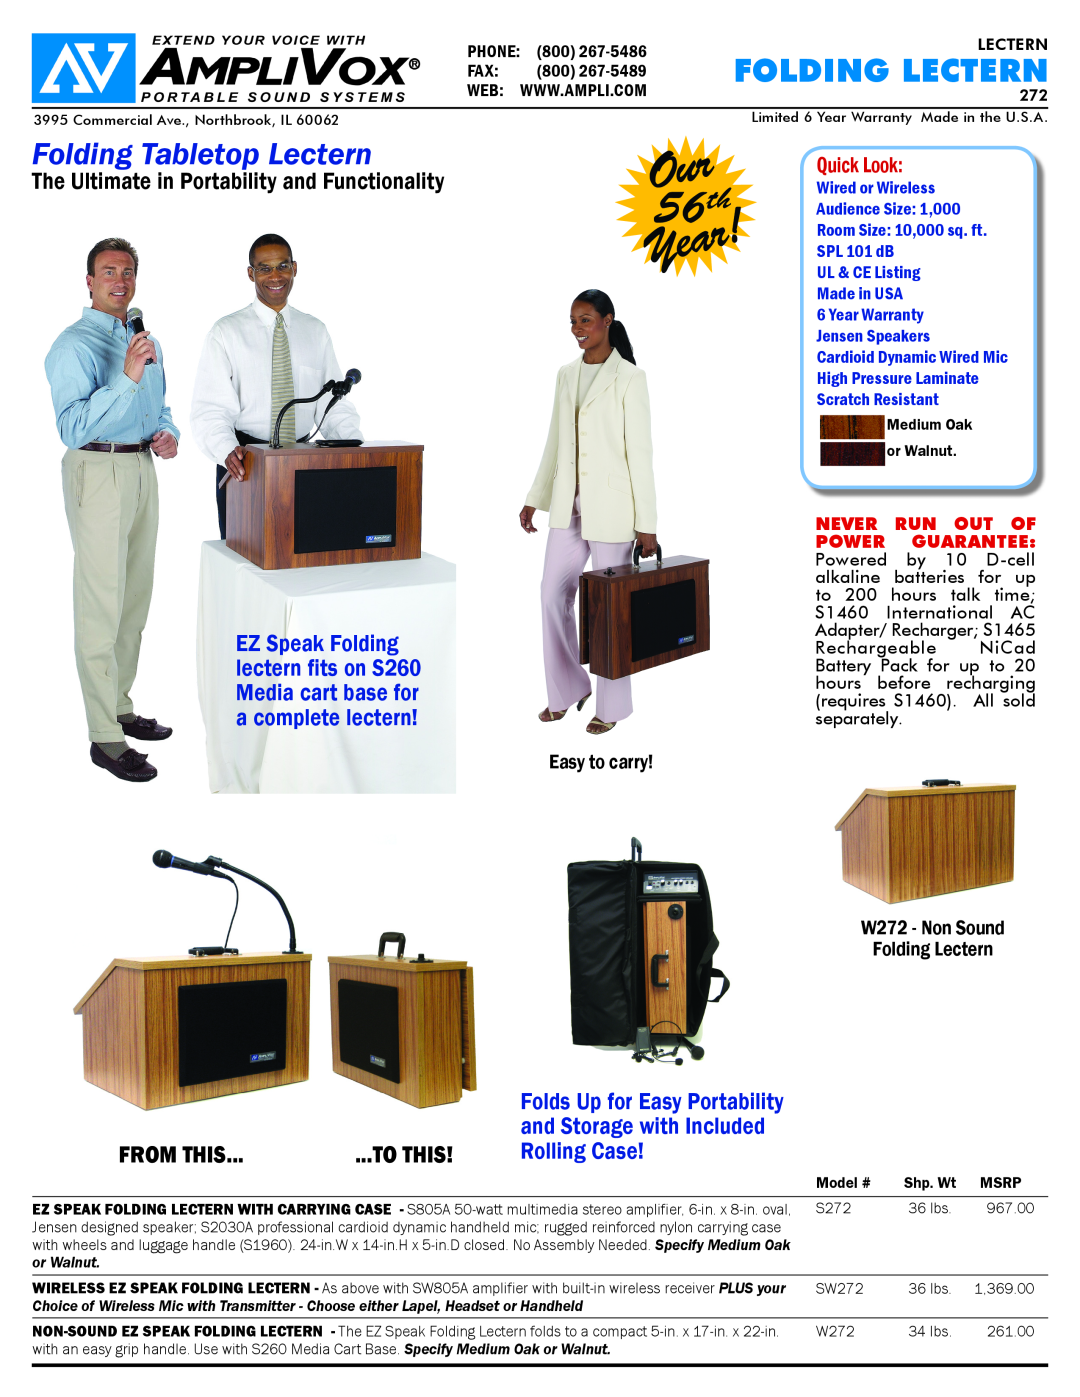 AmpliVox S250 folding LECTERN, Folding Tabletop Lectern, Easy to carry, W272 - Non Sound Folding Lectern, or Walnut, 56th 